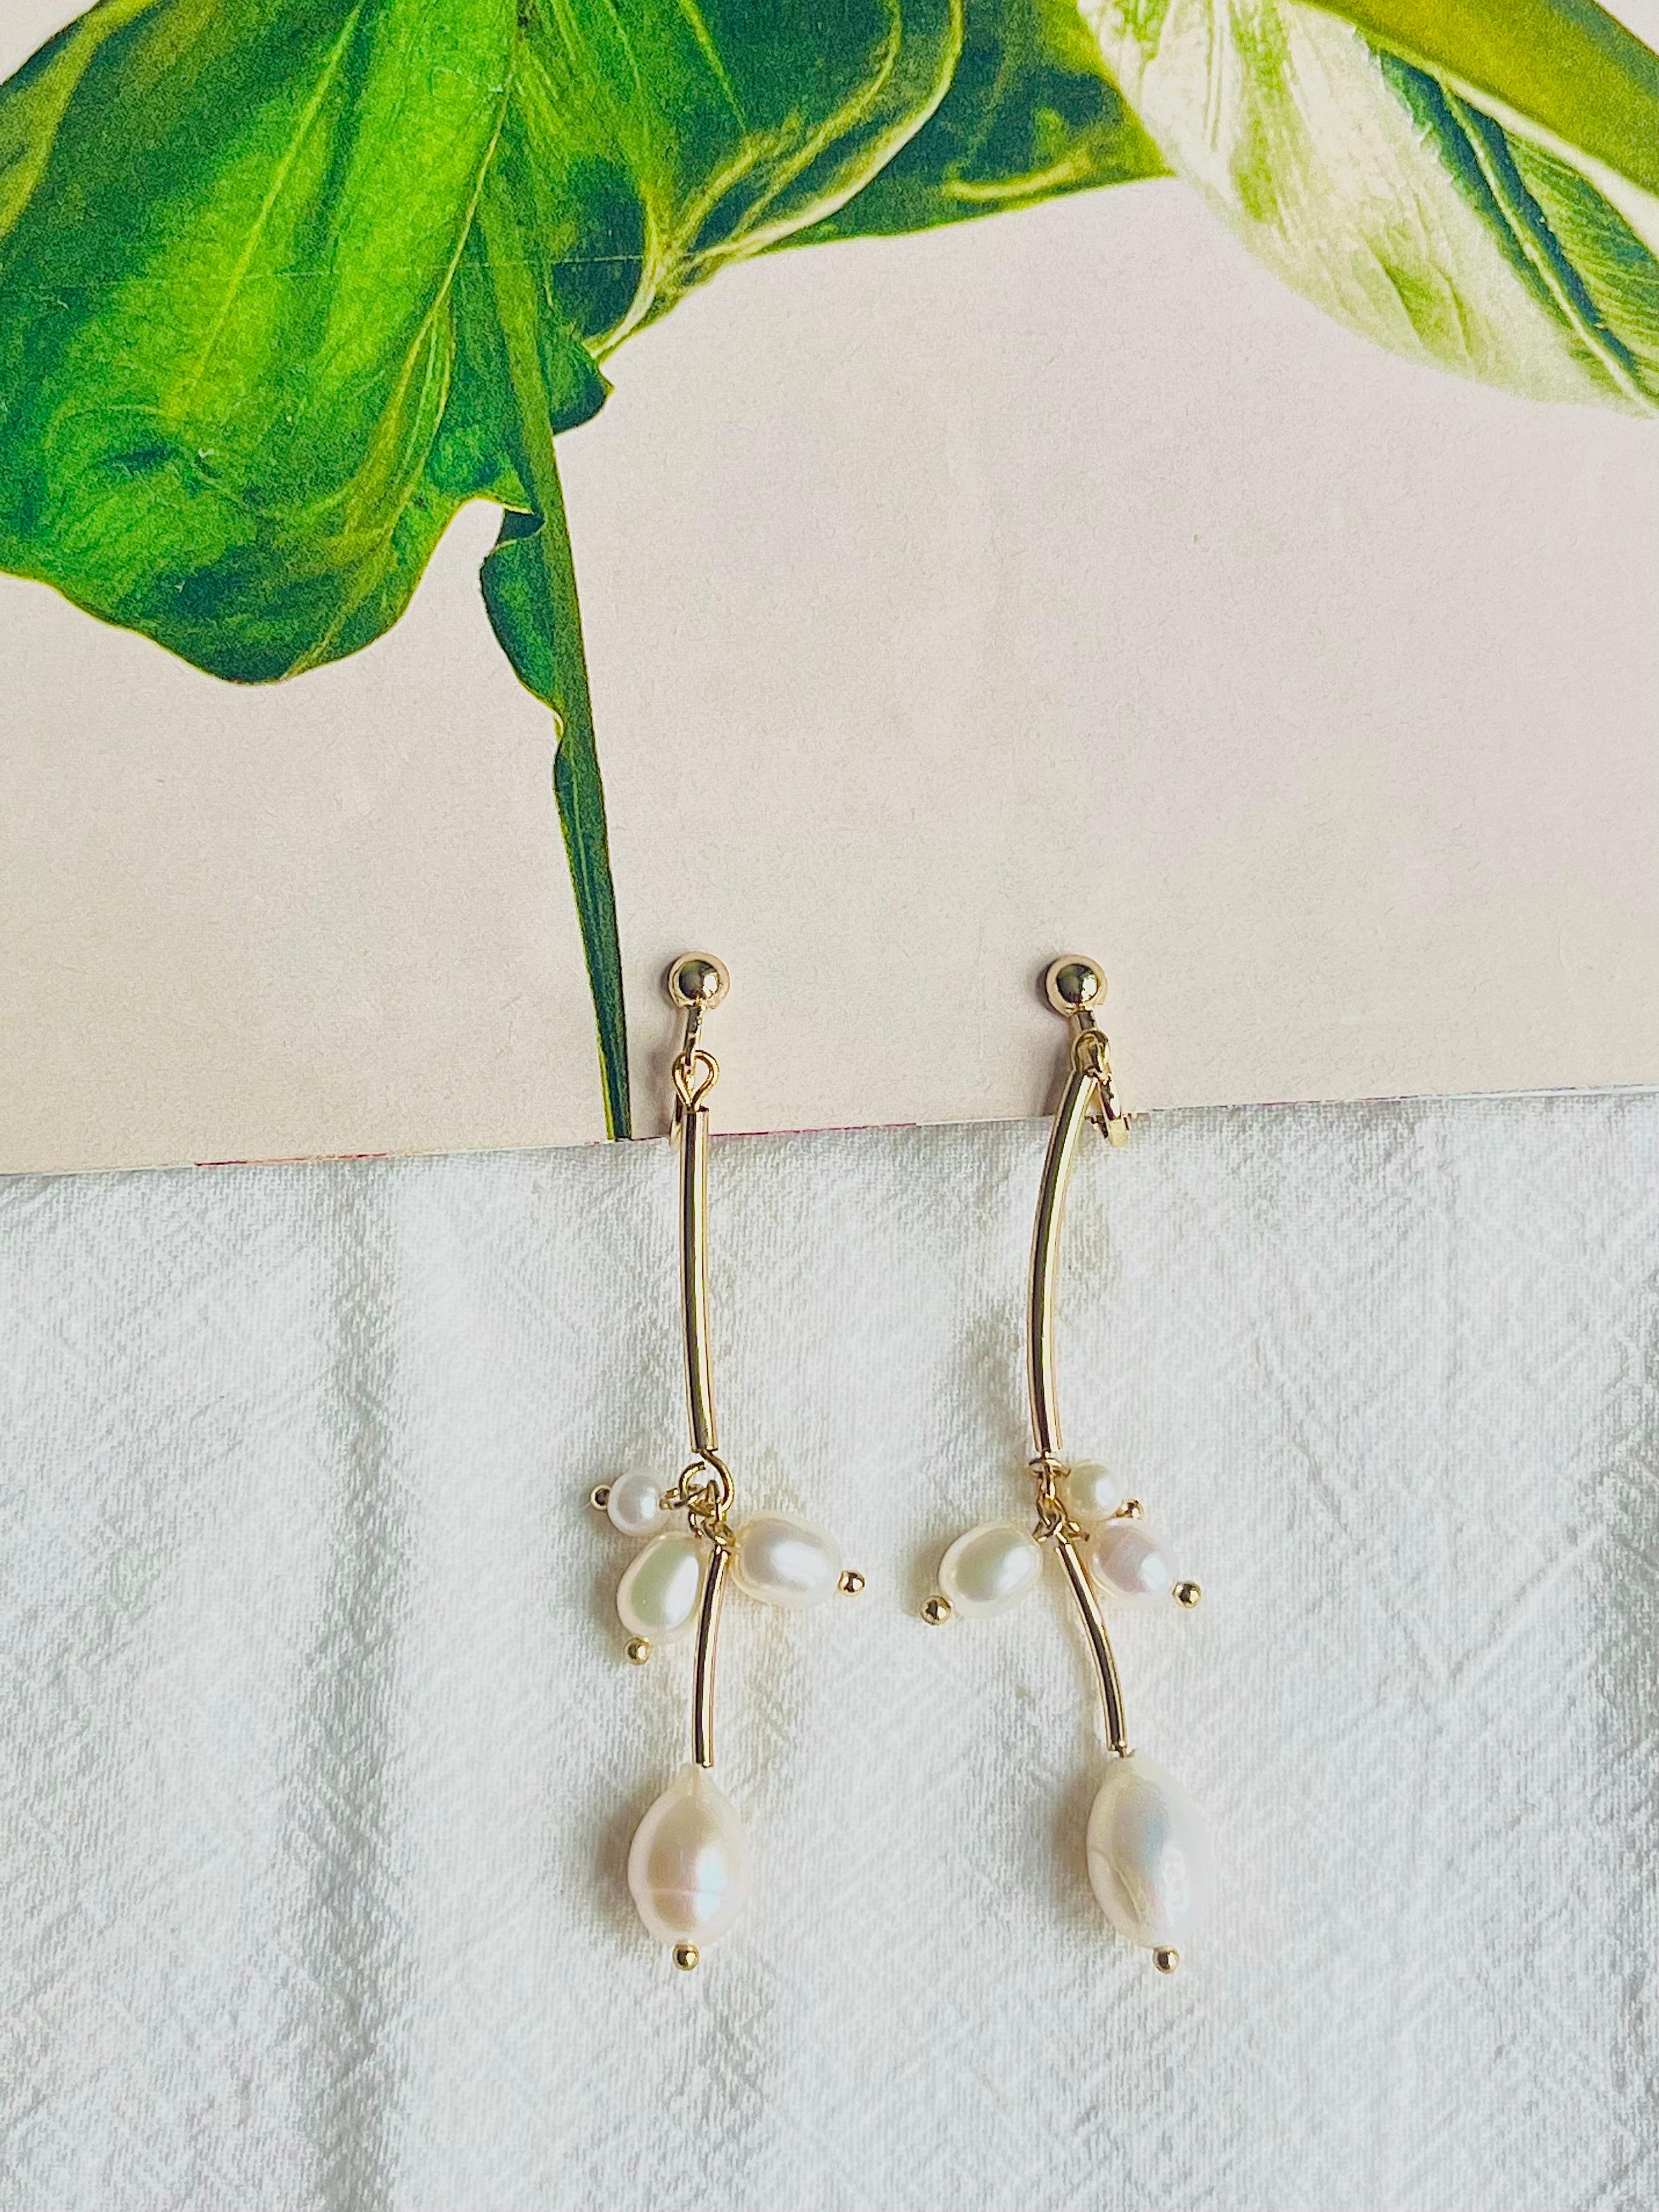 White Oval Cluster Pearls Curled Long Drop Dangle Elegant Gold Pierced Earrings In New Condition For Sale In Wokingham, England